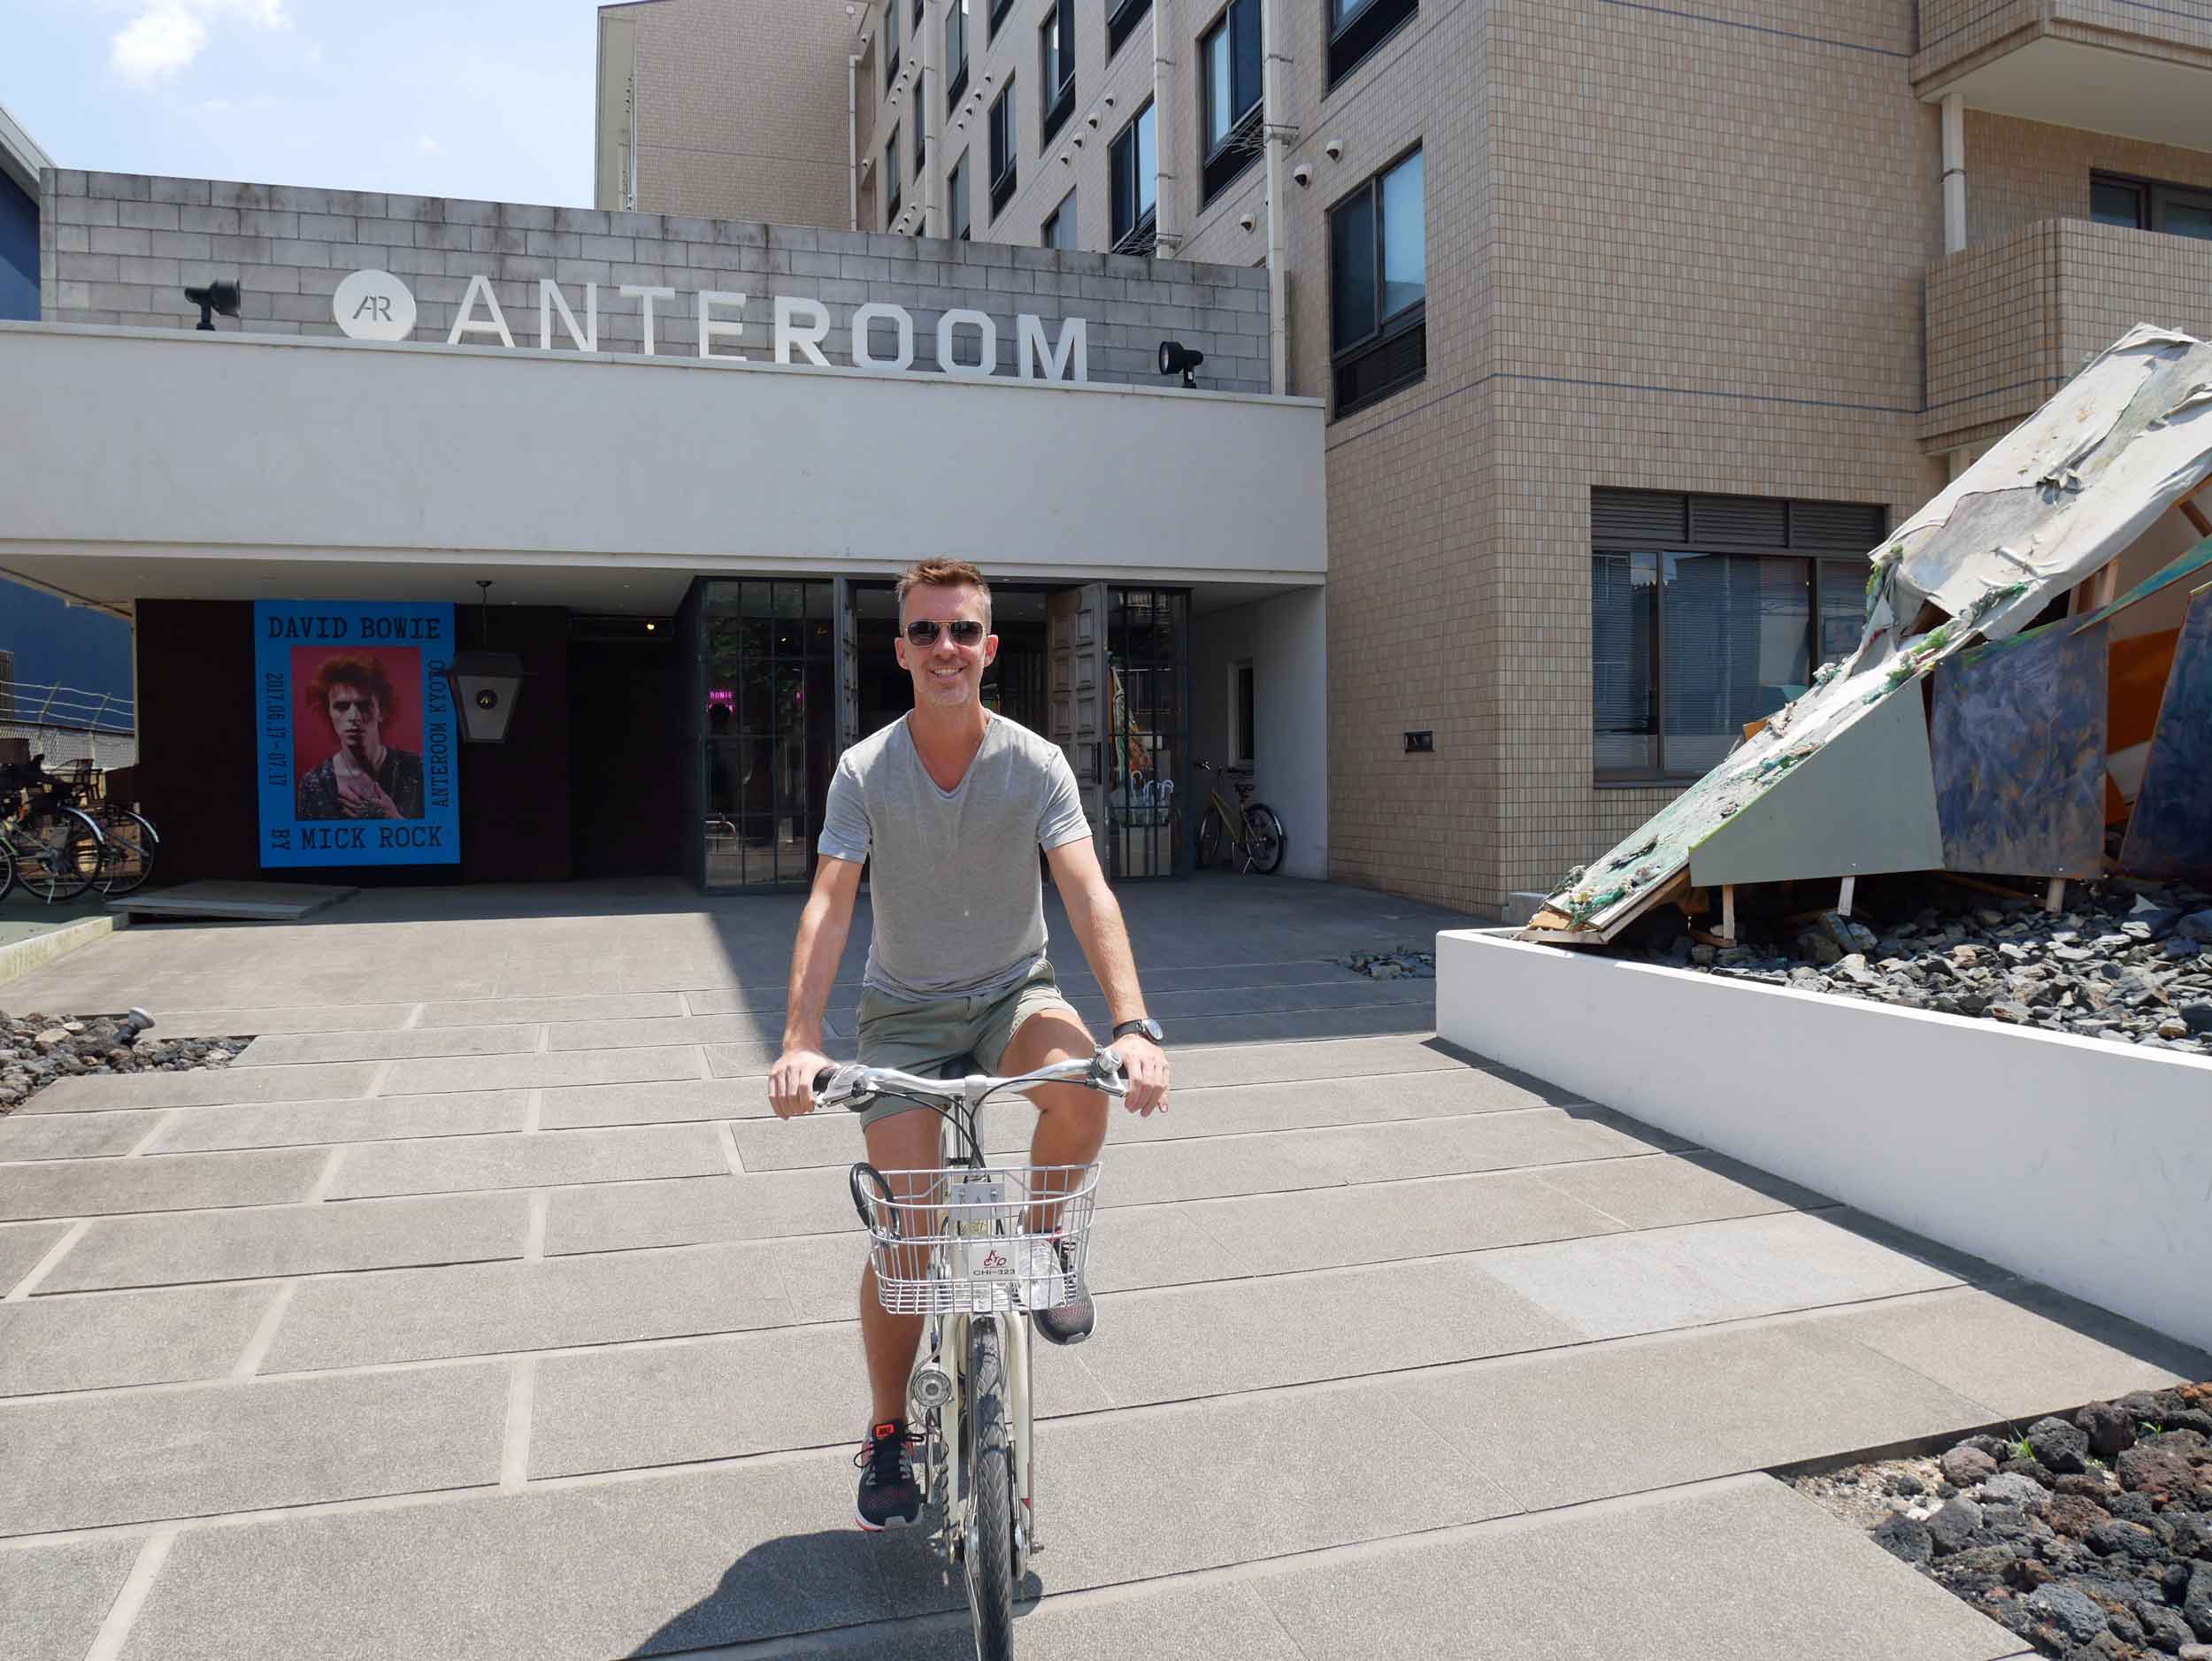  After checking in, we checked out Anteroom's bicycles, our preferred mode of transportation for the weekend.&nbsp; 